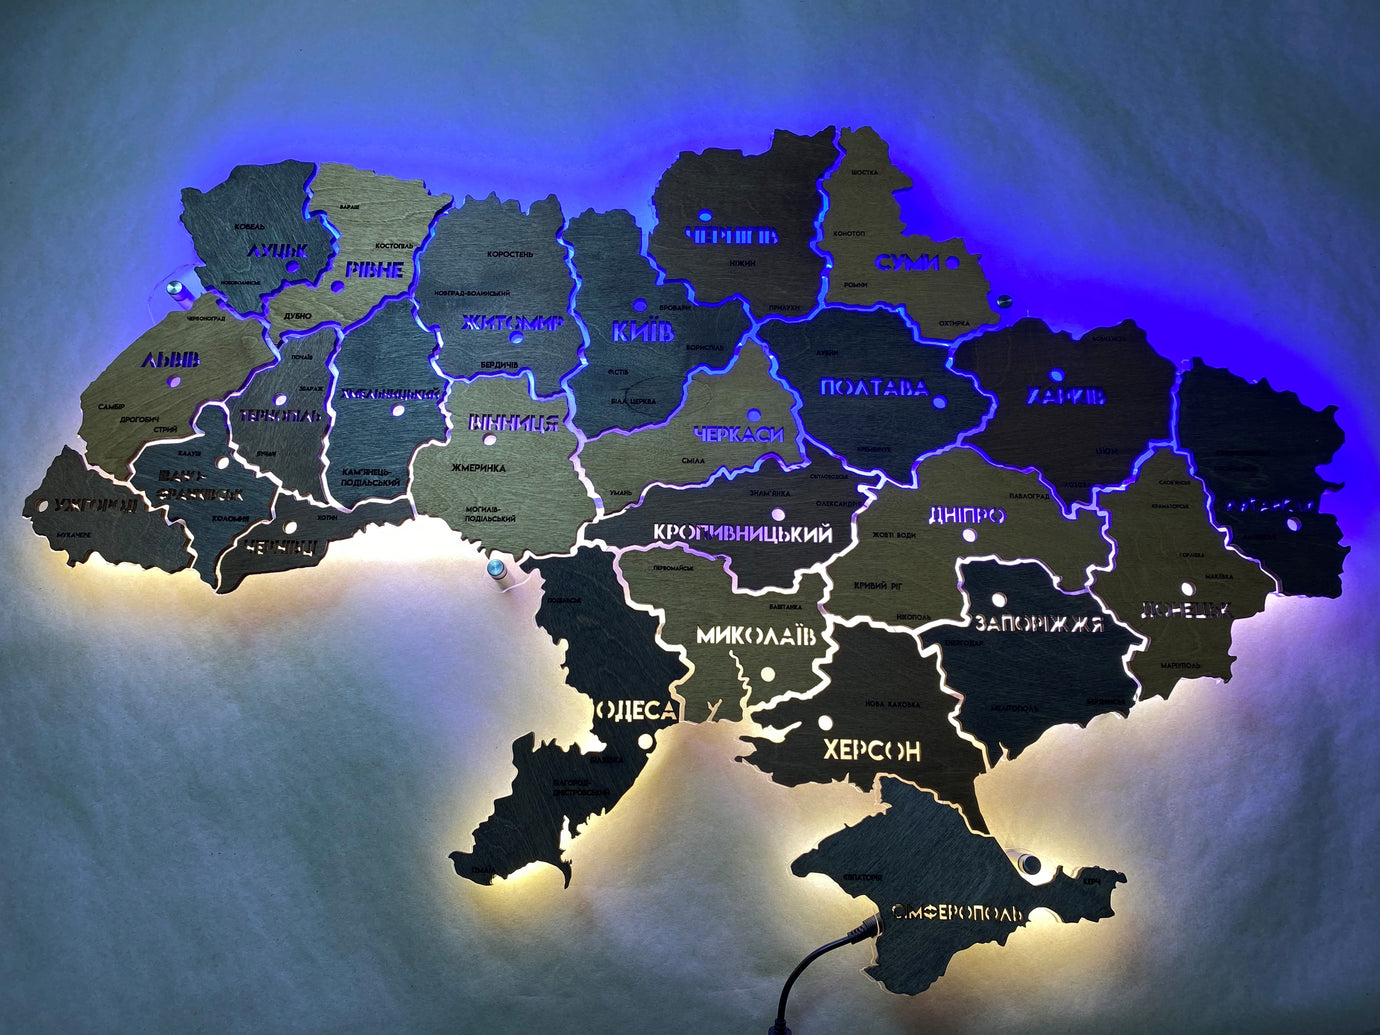 Ukraine LED map on acrylic glass with backlighting  between regions color Brut